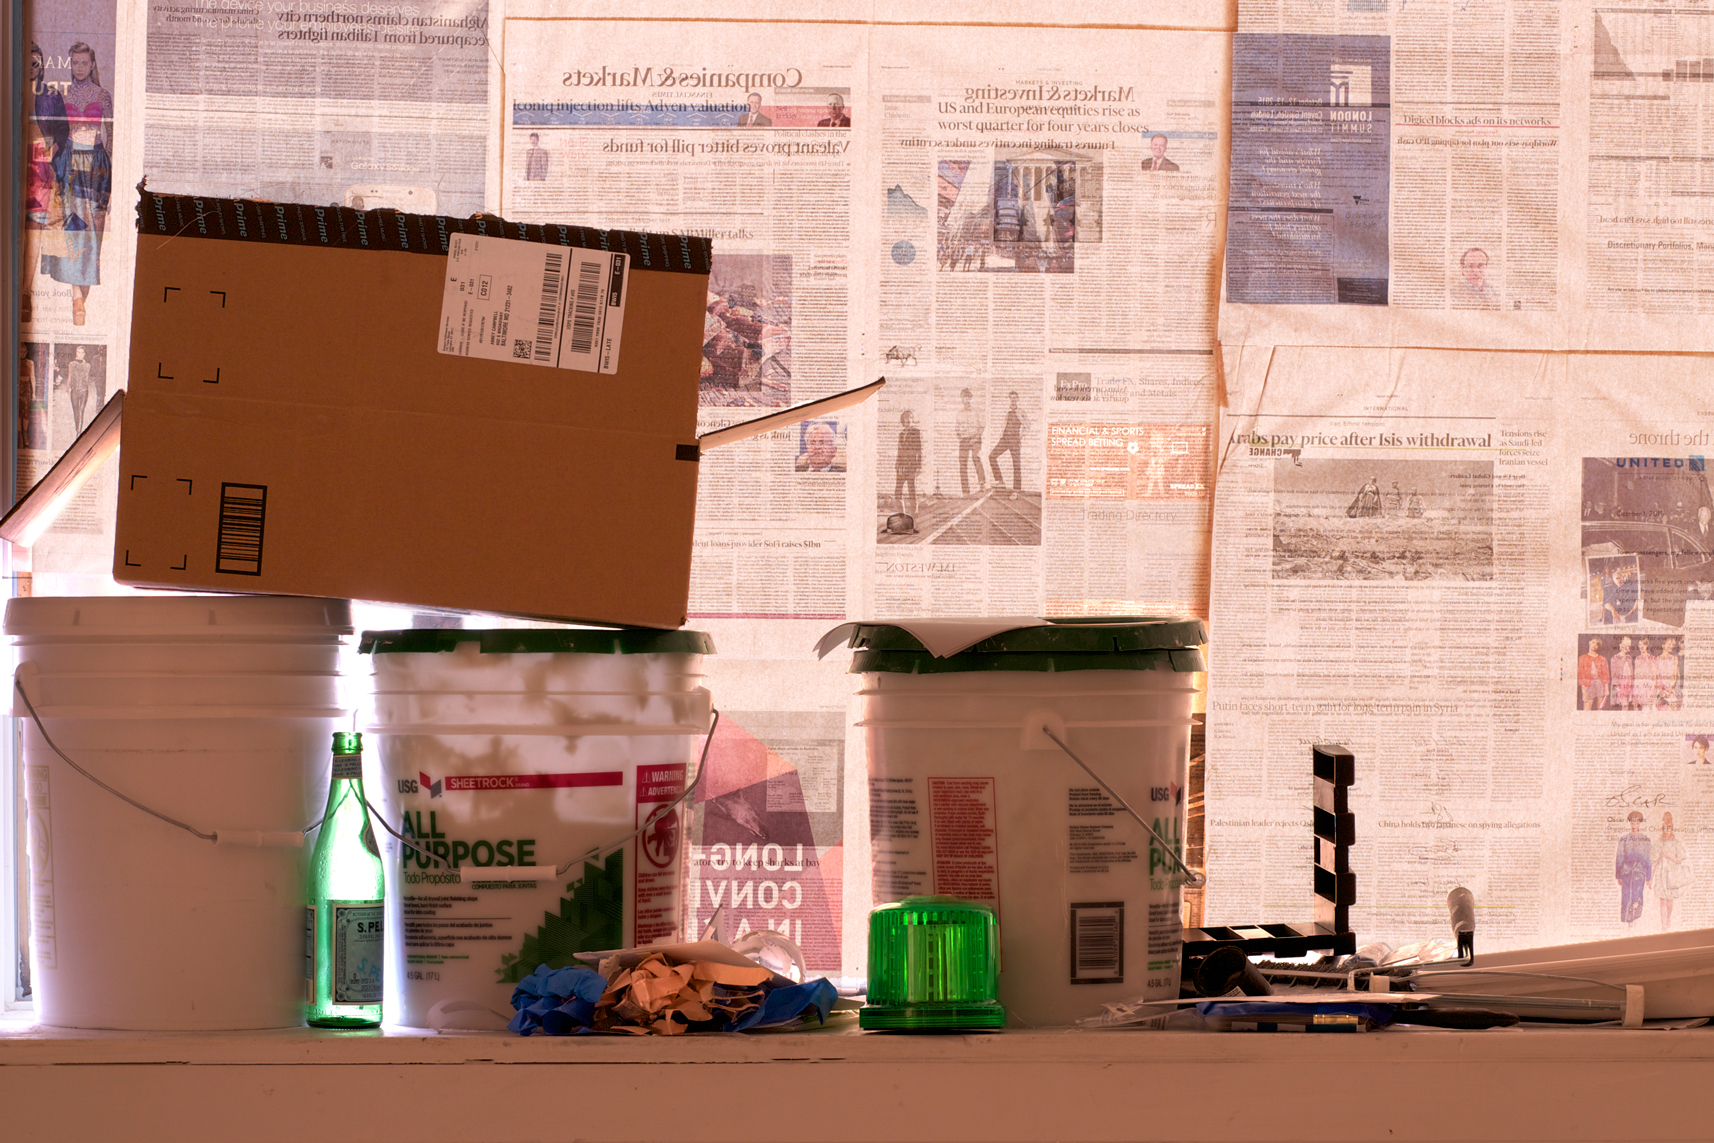 Buckets of joint compound, tools, and Amazon packaging sit in front of a window lined with Financial Times newspaper